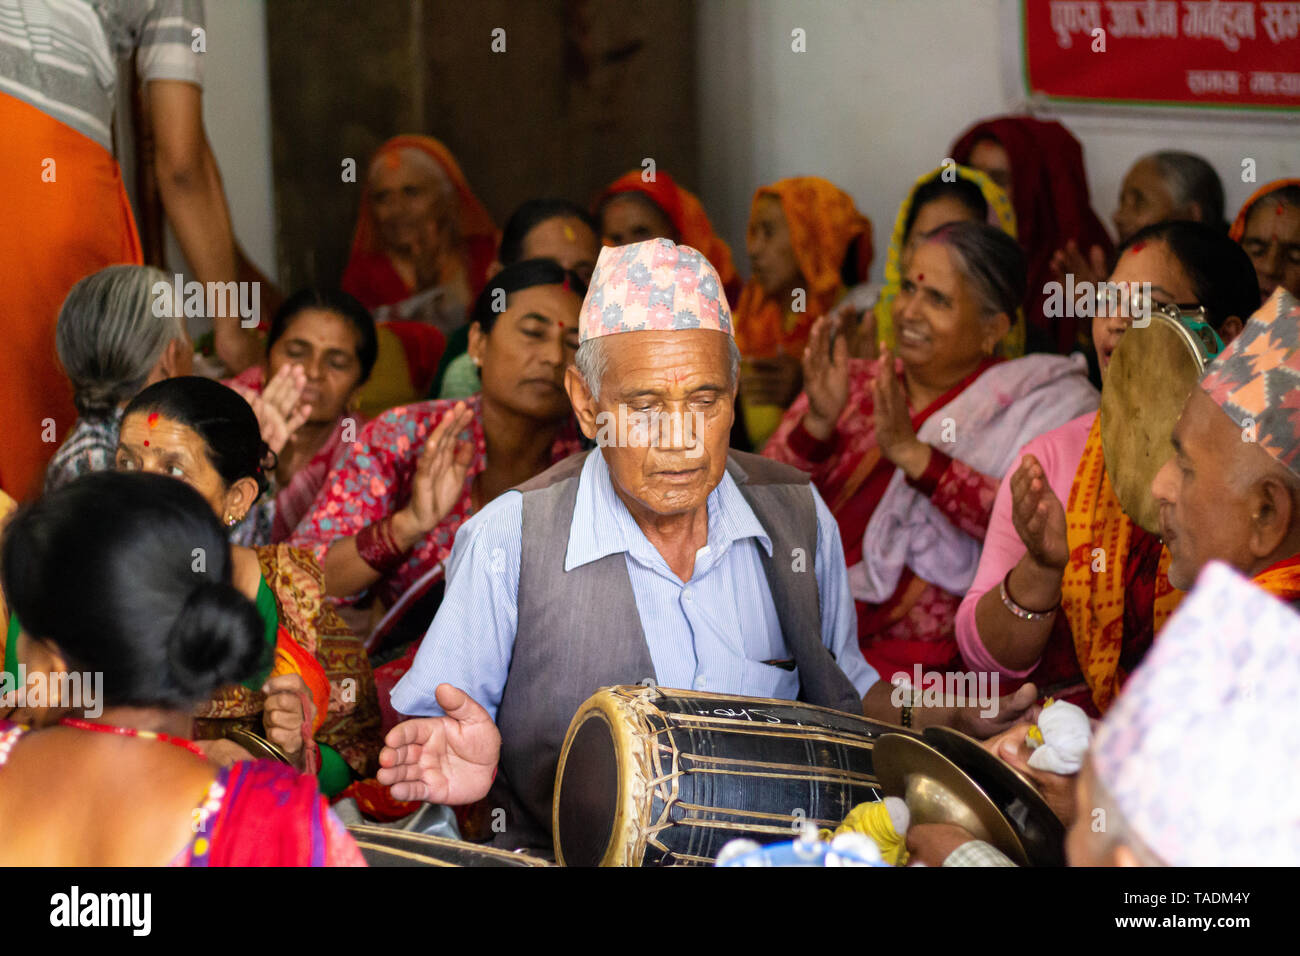 Nepalese middle aged man with traditional Dhaka topi hat playing madal drum at dance celebration surrounded by women. Stock Photo